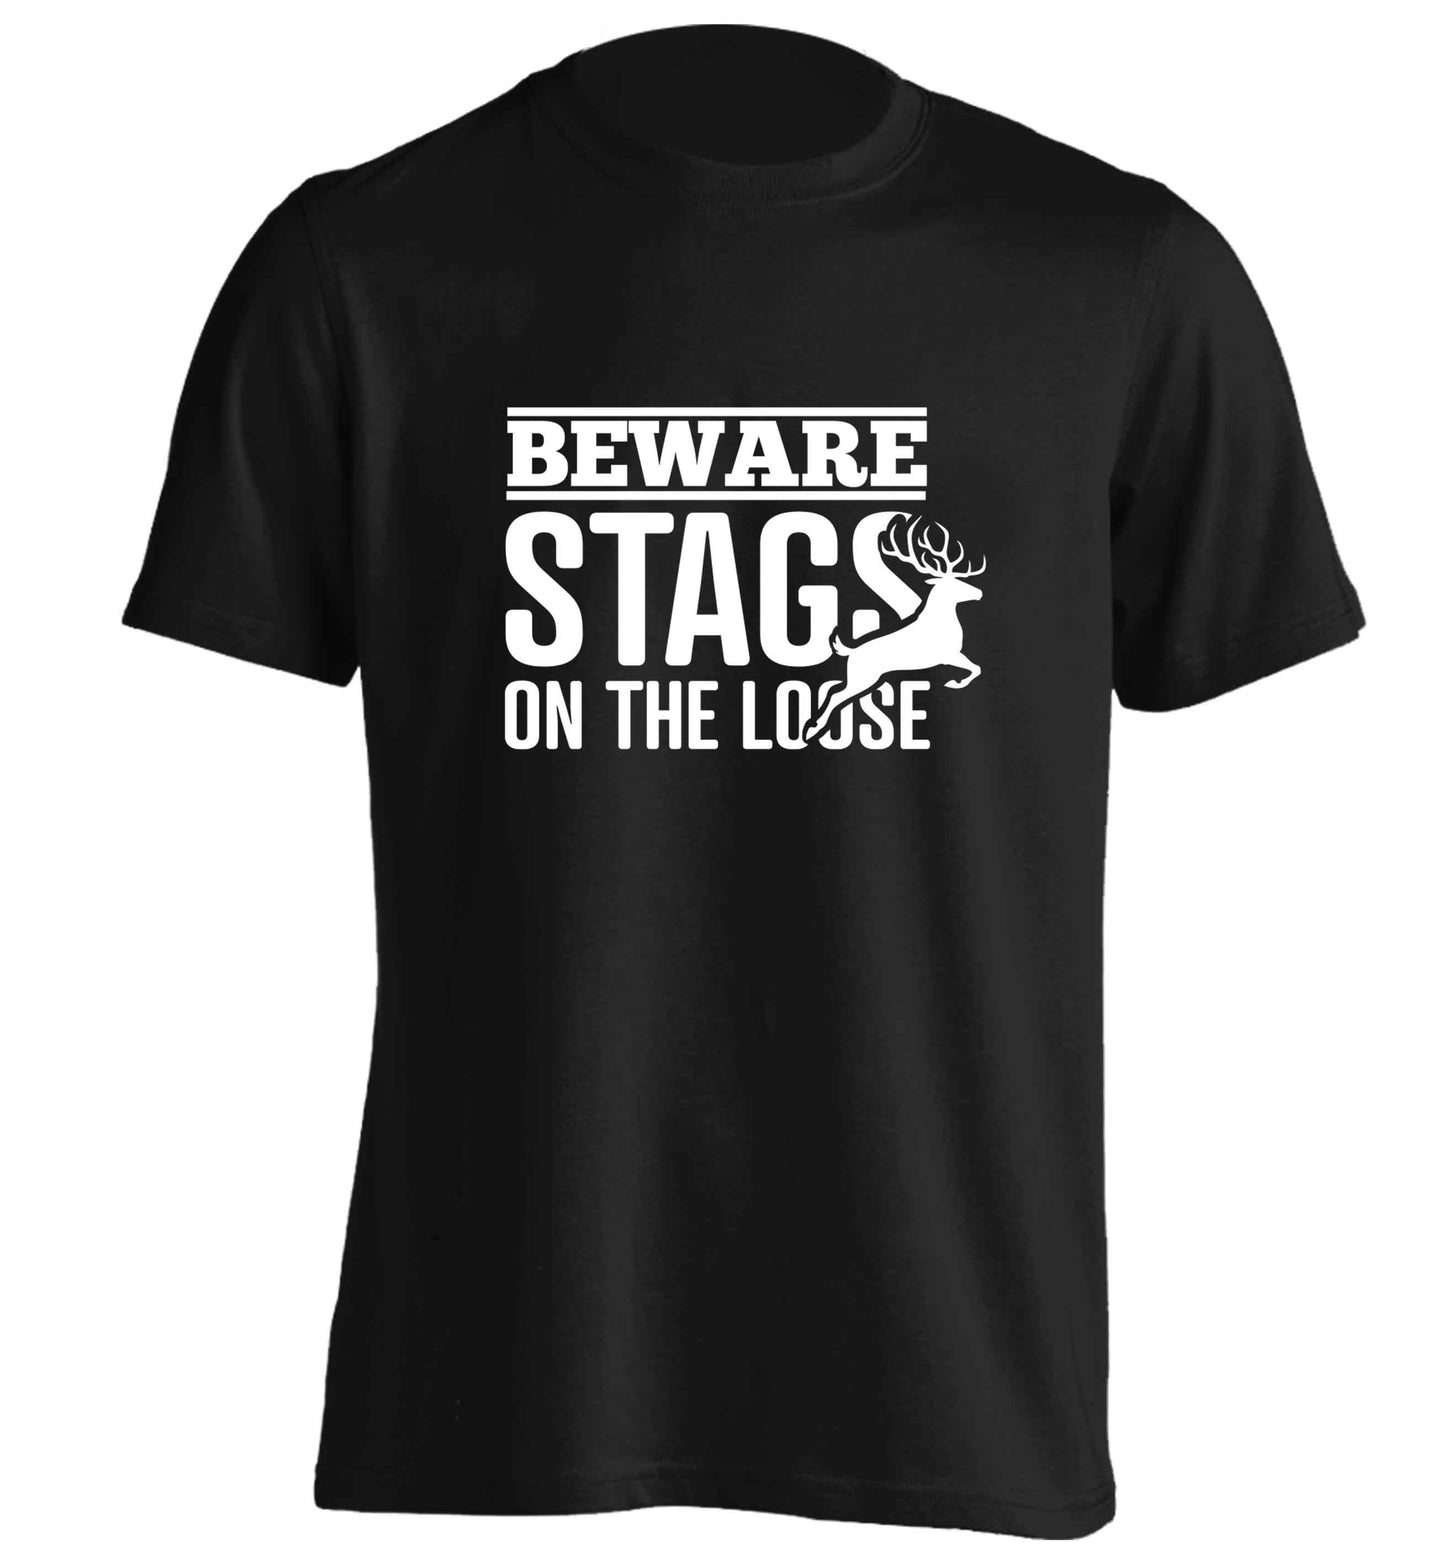 Beware stags on the loose adults unisex black Tshirt 2XL